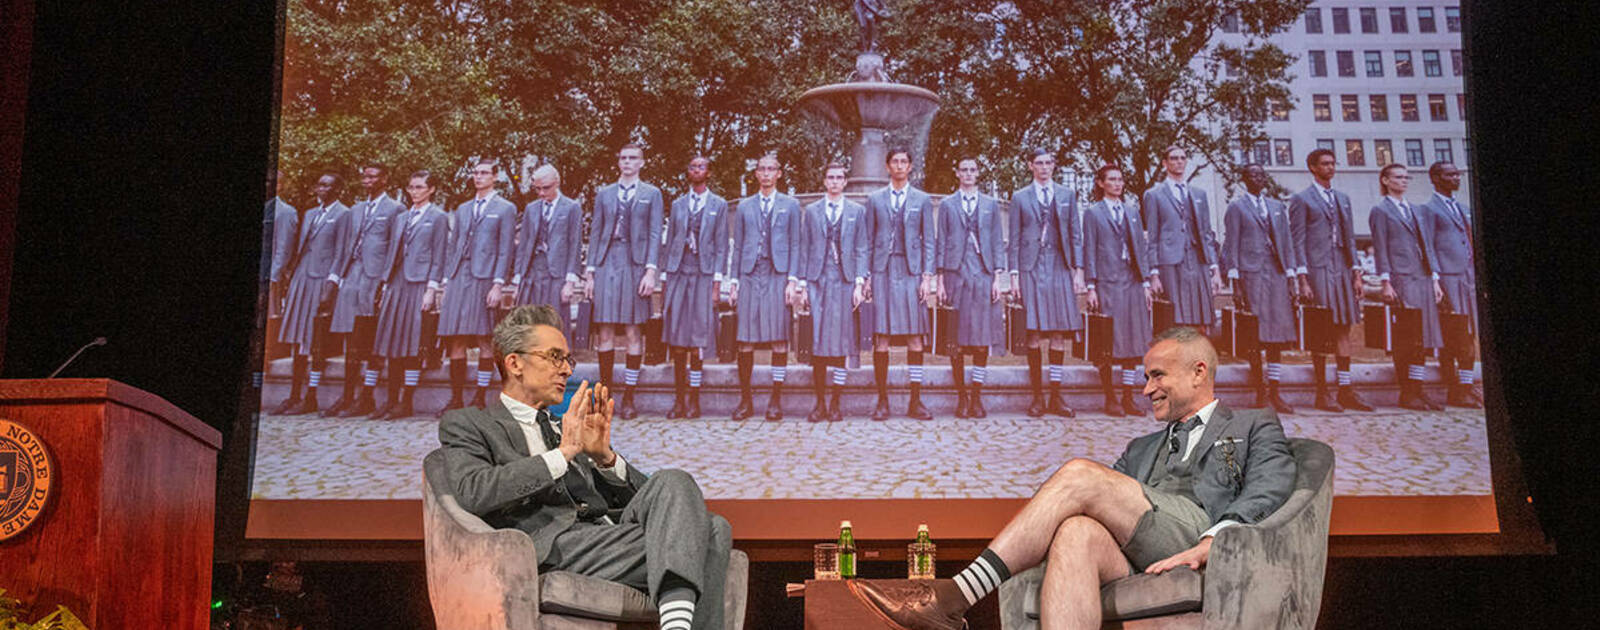 ‘Do something you love and do it well’: NDIAS artist-in-residence Thom Browne speaks to Notre Dame community | News | Notre Dame News